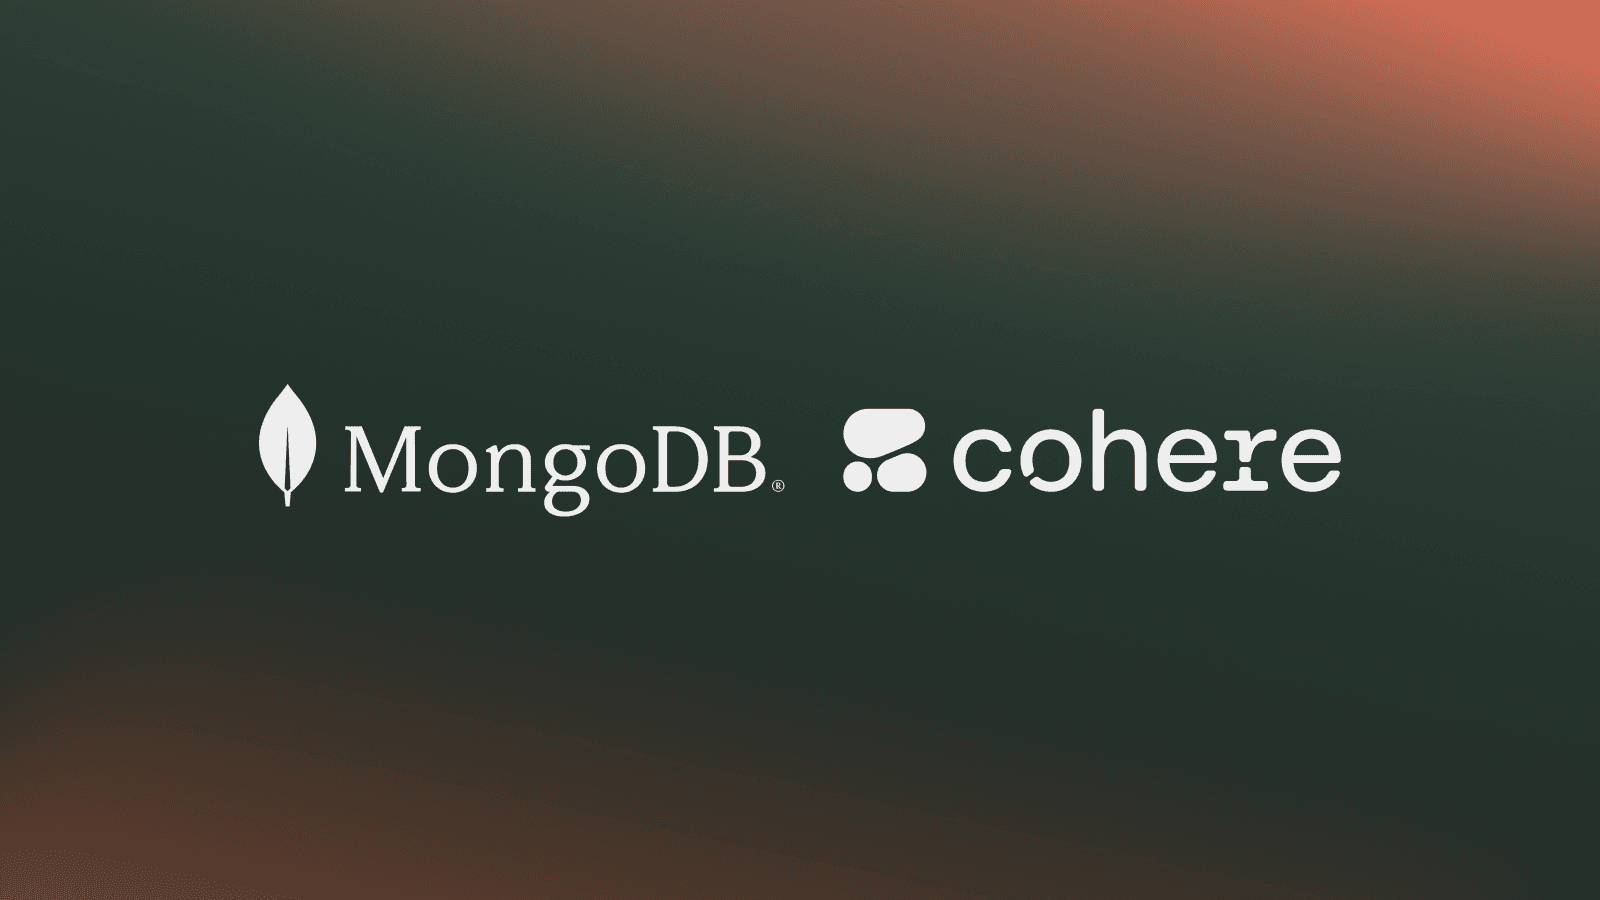 Cohere Partners with MongoDB on New Program to Build Advanced Enterprise AI Applications